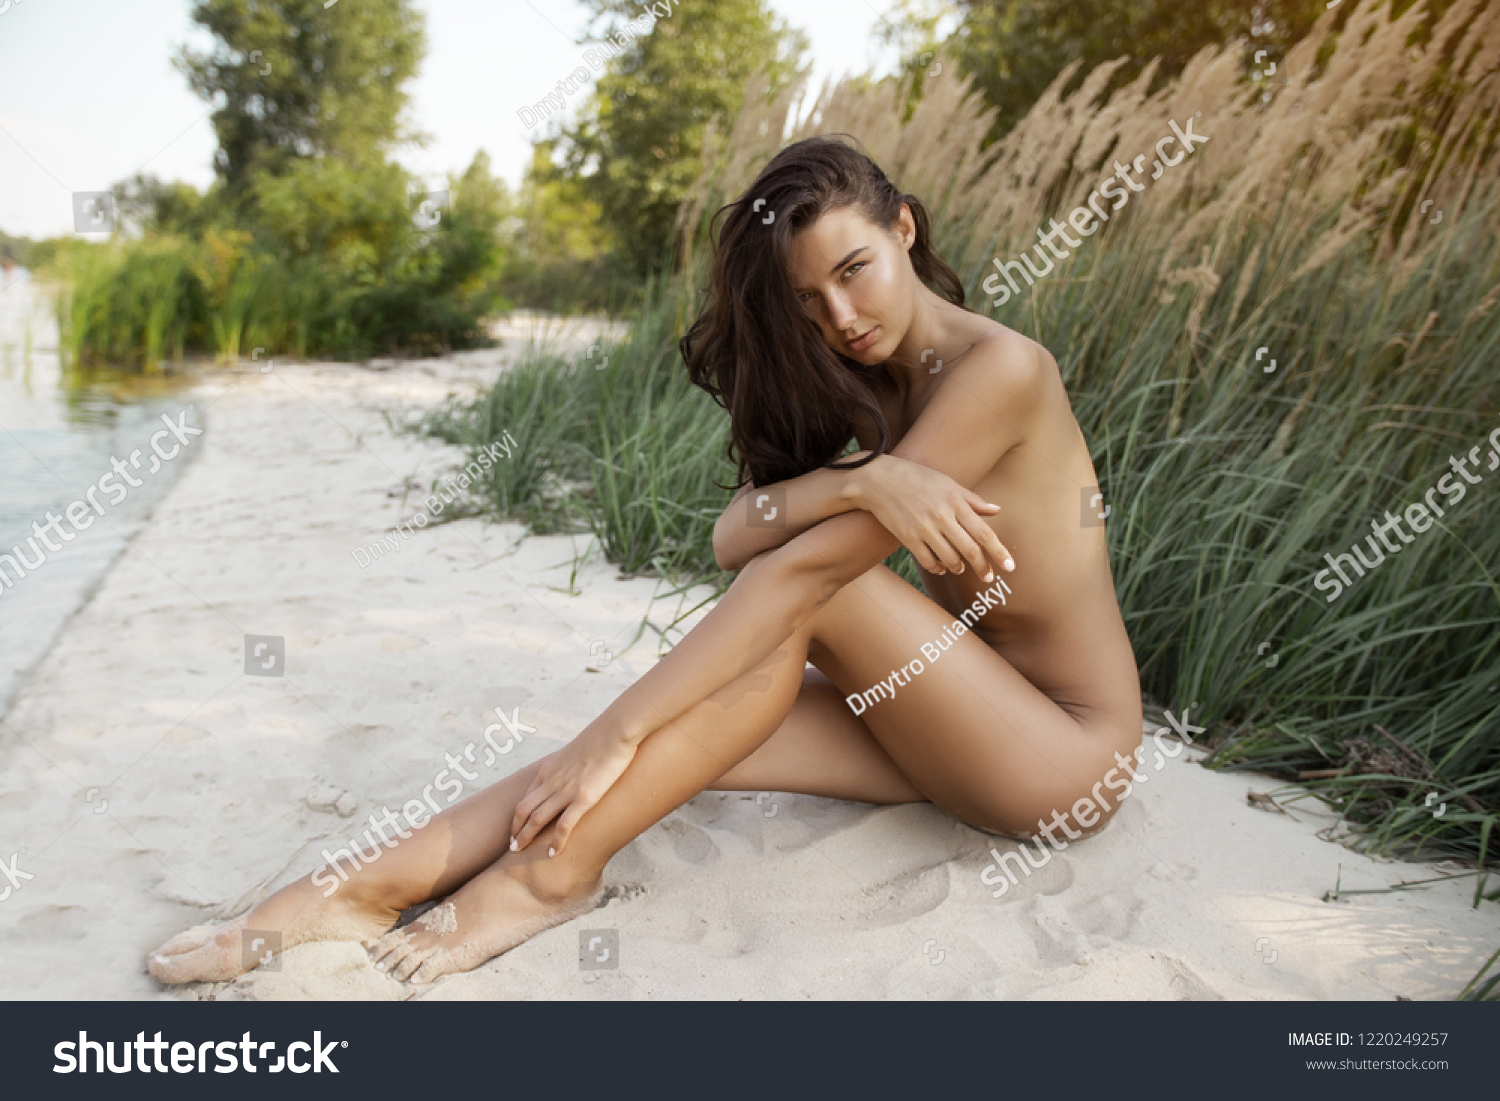 Oictures nude beach 14 Stunning